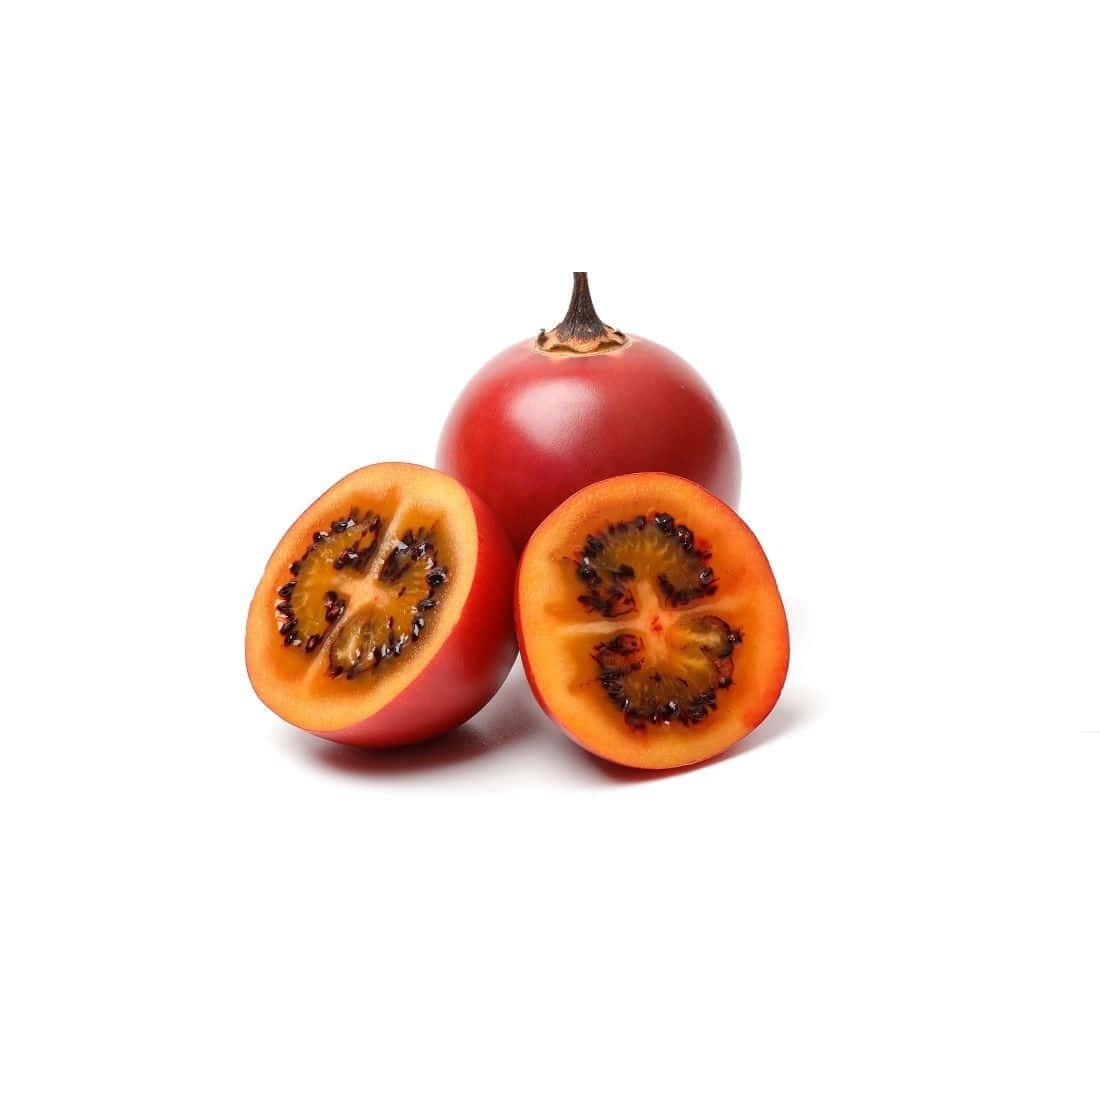 Little Red Tamarillo Fruit With One Sliced In Half Picture